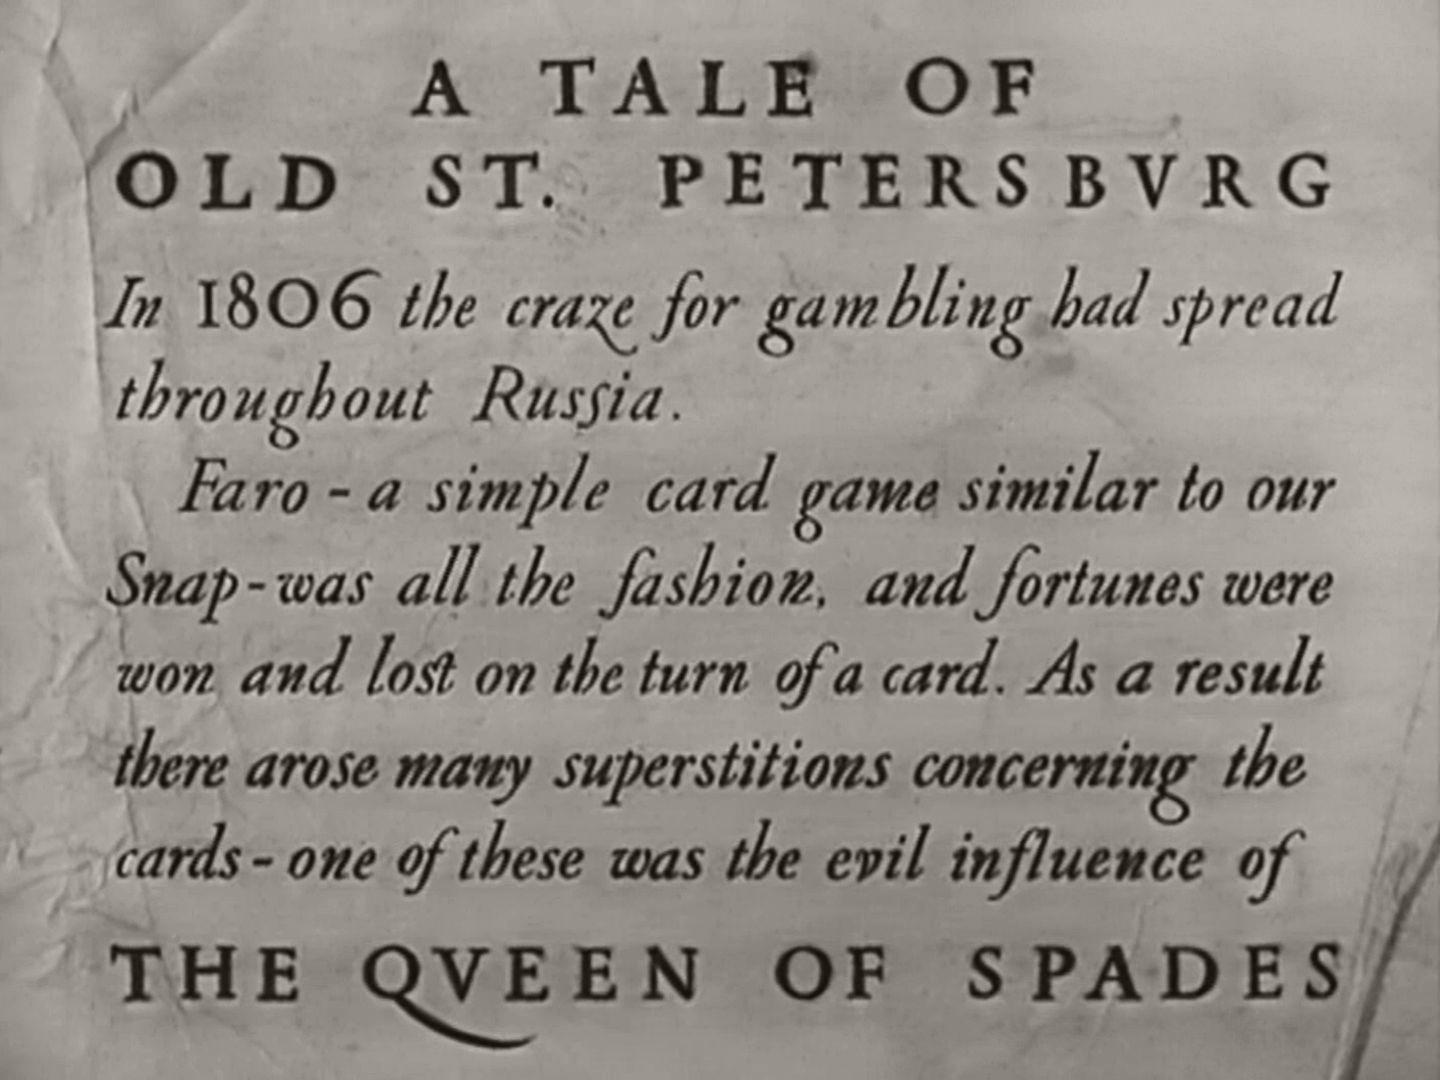 Main title from The Queen of Spades (1949) (17). A tale of old St Petersburg. In 1806 the craze for gambling had spread throughout Russia. Faro – a simple card game similar to our Snap – was all the fashion, and fortunes were won and lost on the turn of a card. As a result there arose many superstitions concerning the cards – one of these was the evil influence of the Queen of Spades